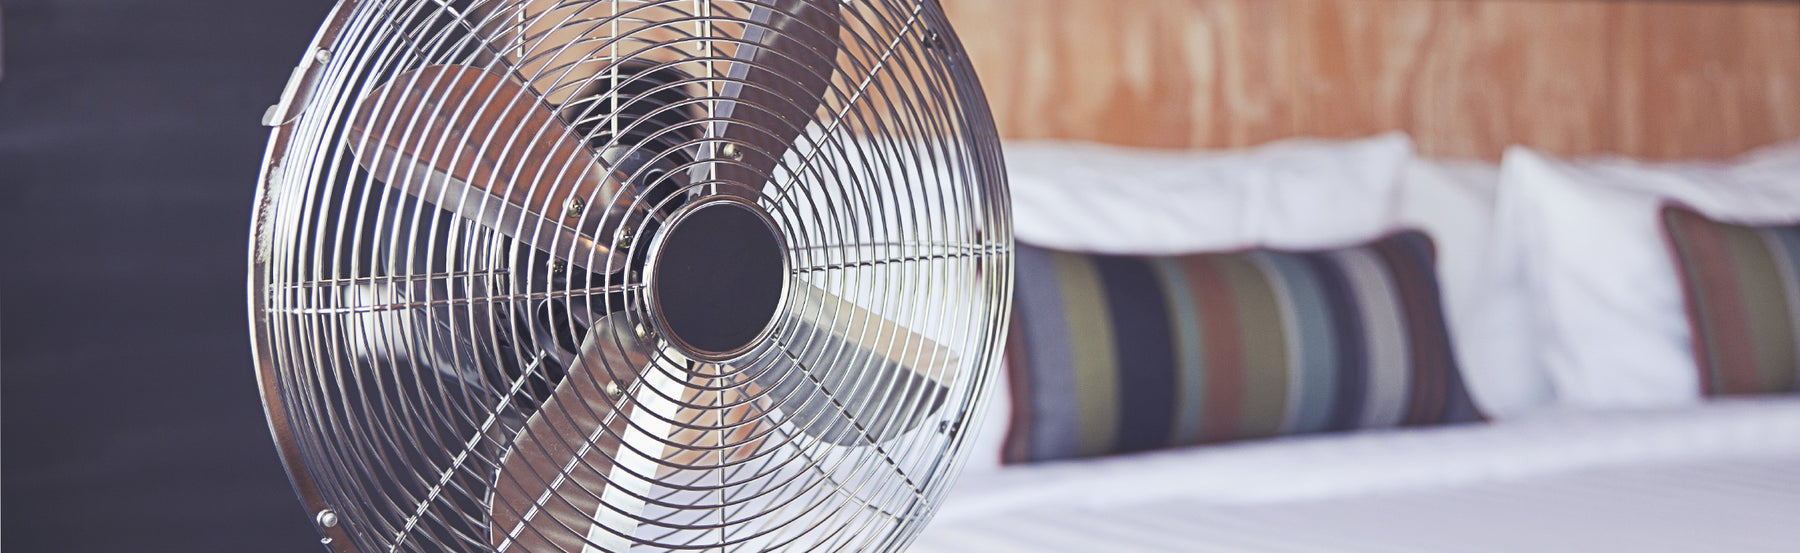 Eight Tips for Keeping Your Bedroom Cool in the Summer